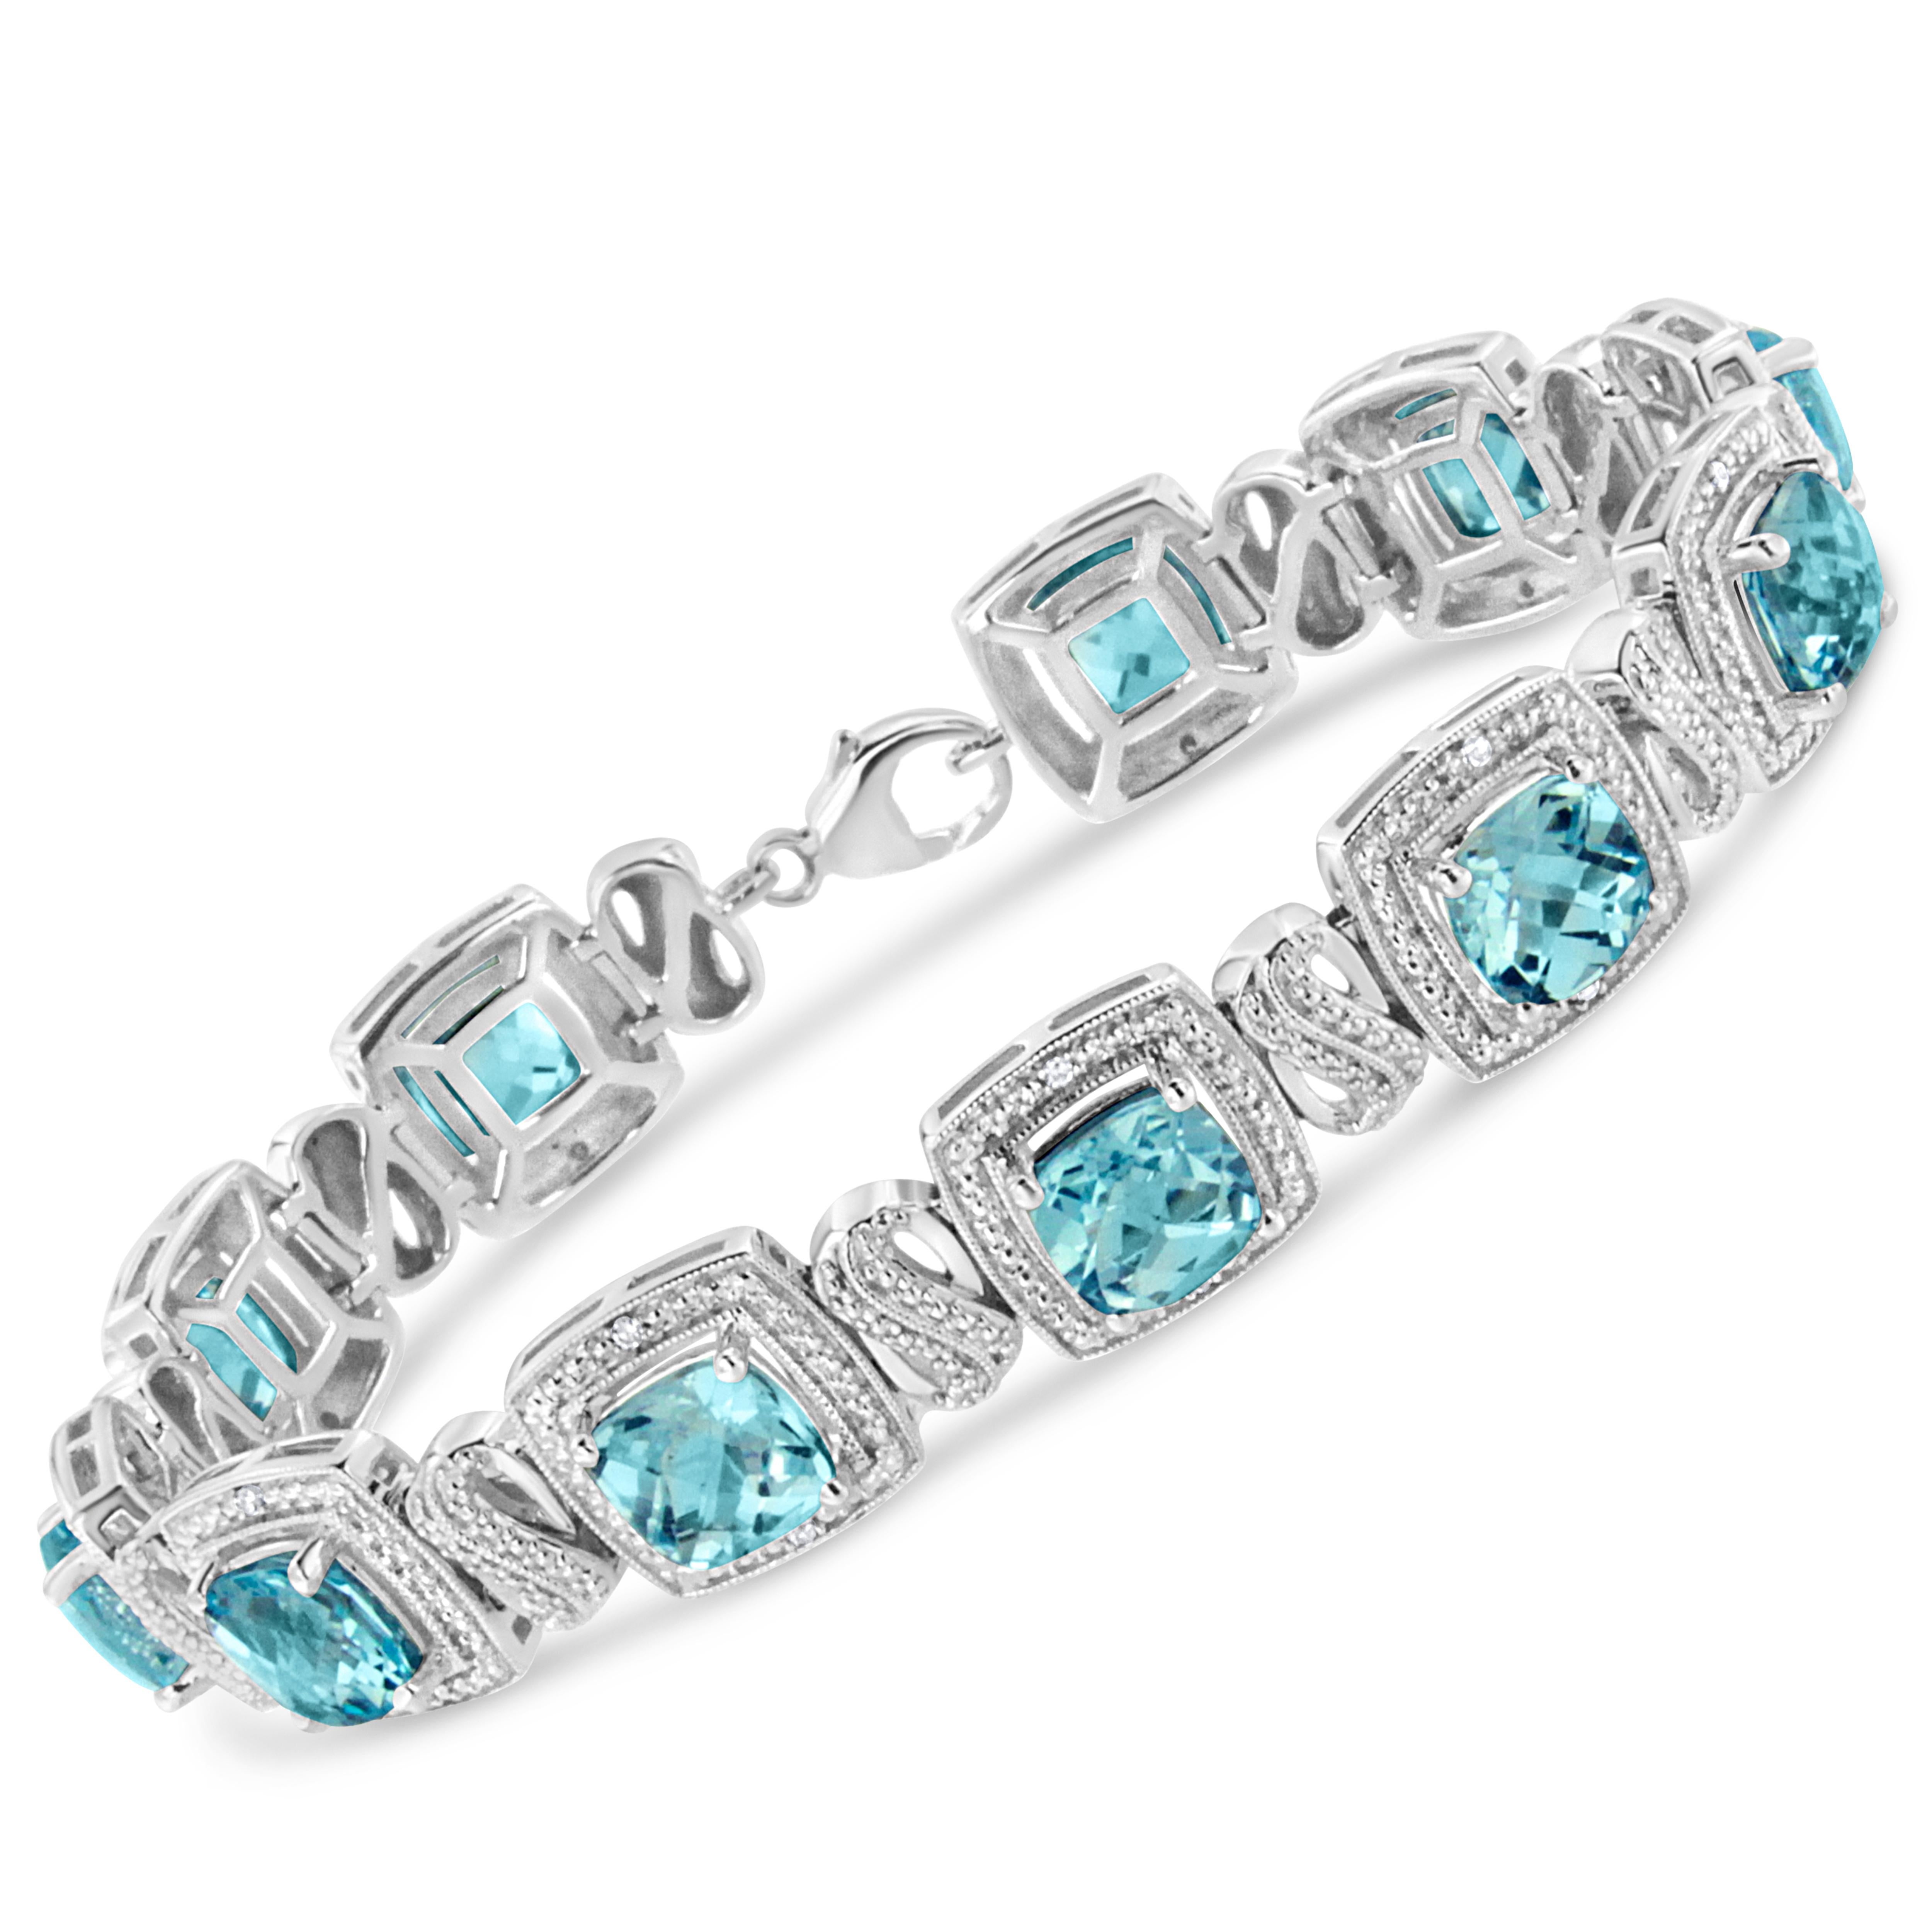 Make a glistening fest for your sweetheart's wrist with this sparkling blue topaz and diamond bracelet. Styled in remarkable sterling silver this square shape bracelet is embellished with 11 alluring prong set cushion cut blue topaz accentuated by